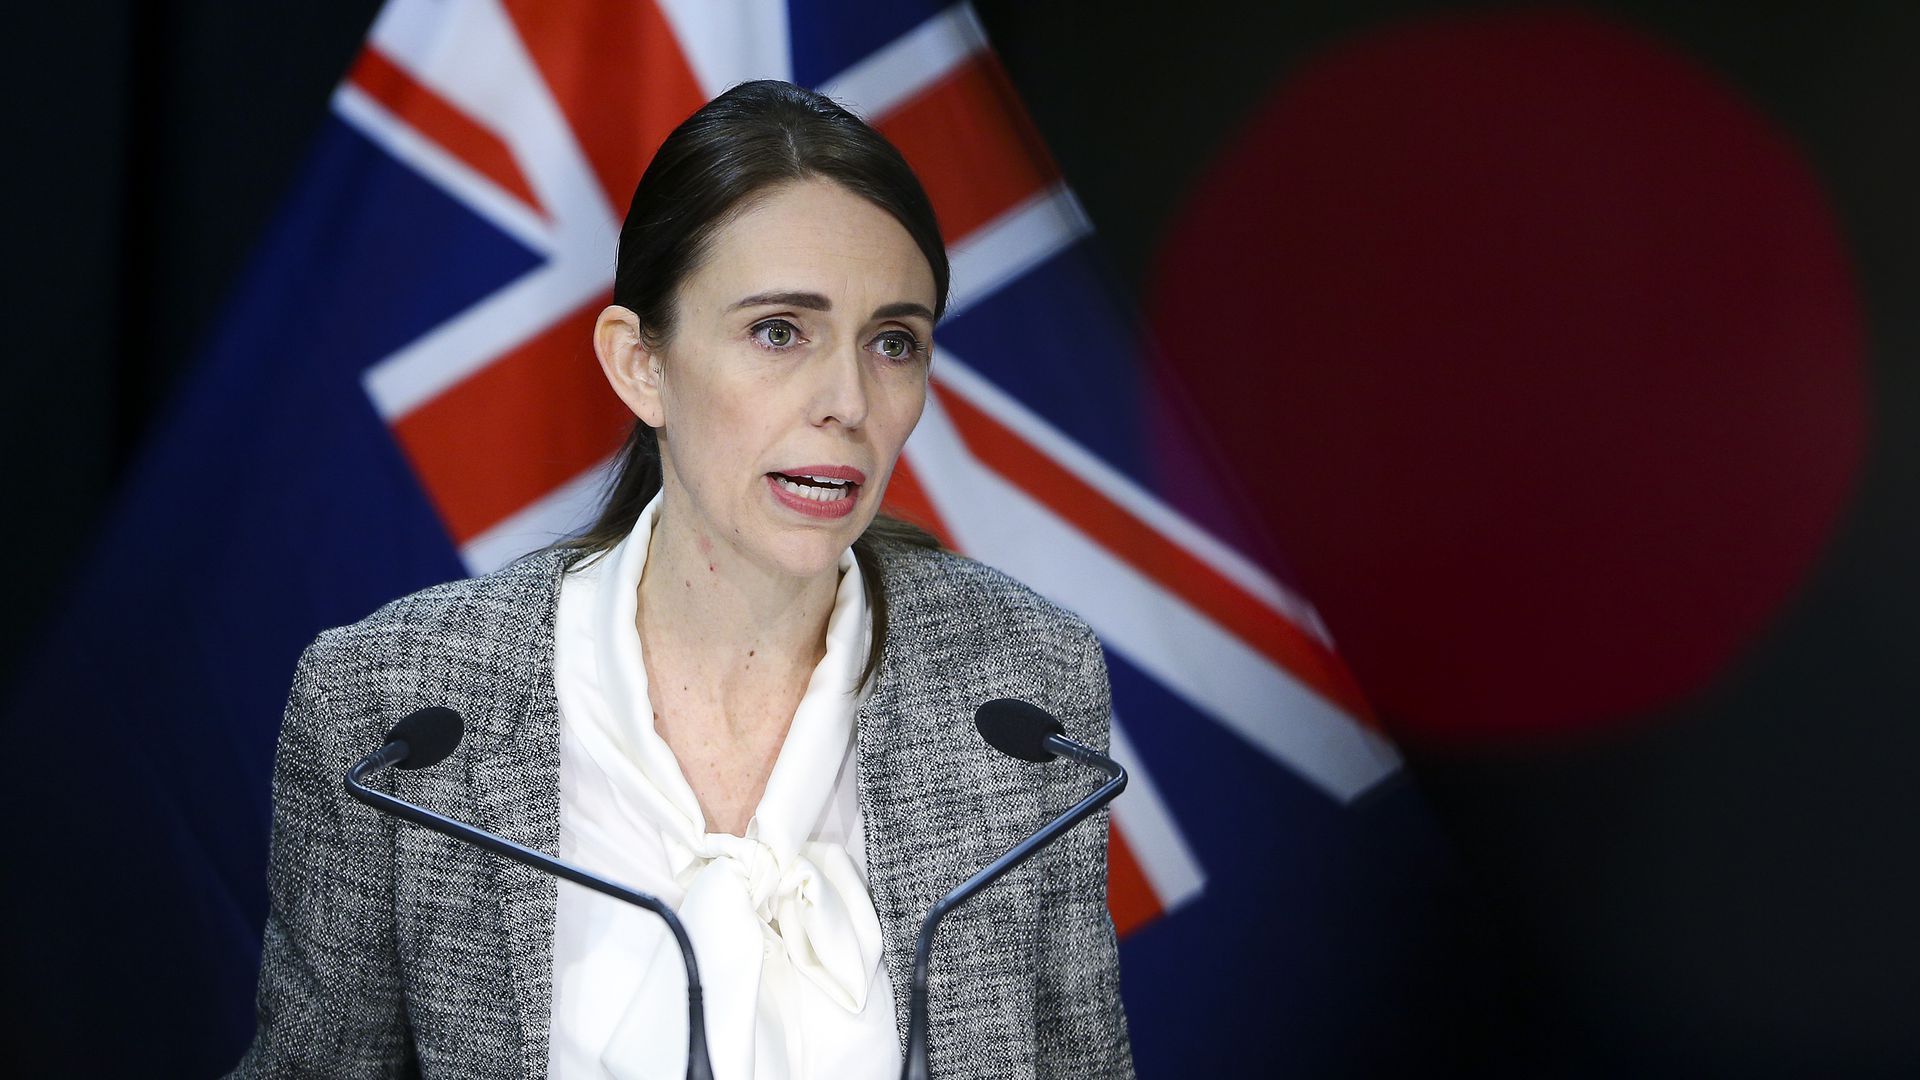 New Zealand Appoints Military To Lead Quarantine After COVID 19 Cases